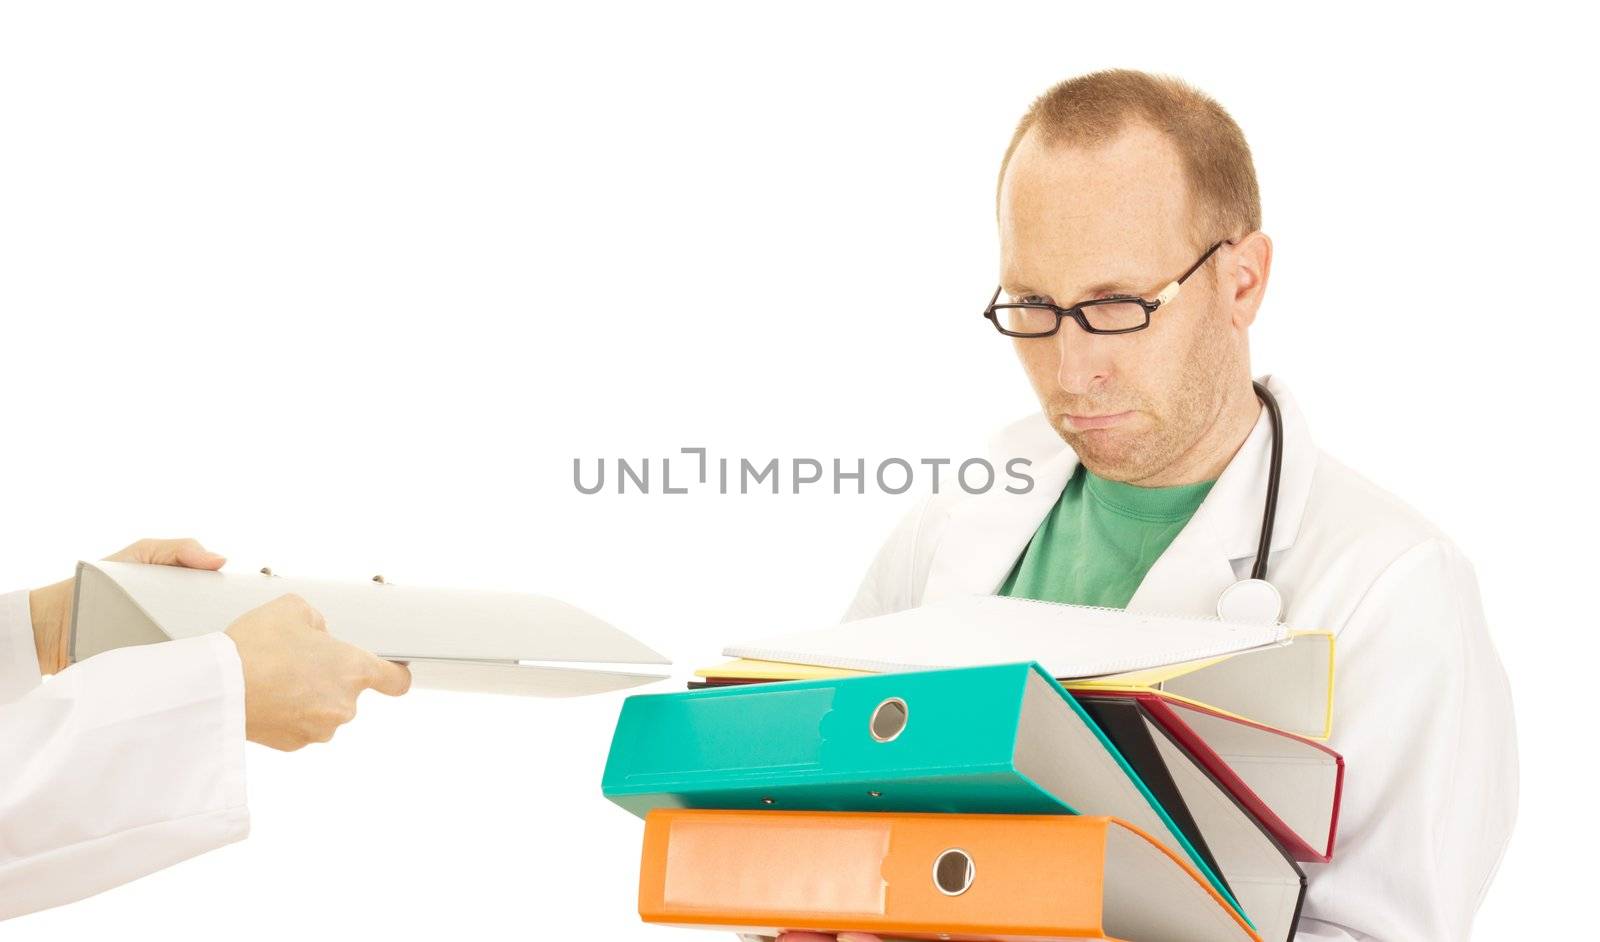 Medical doctor with a lot of work